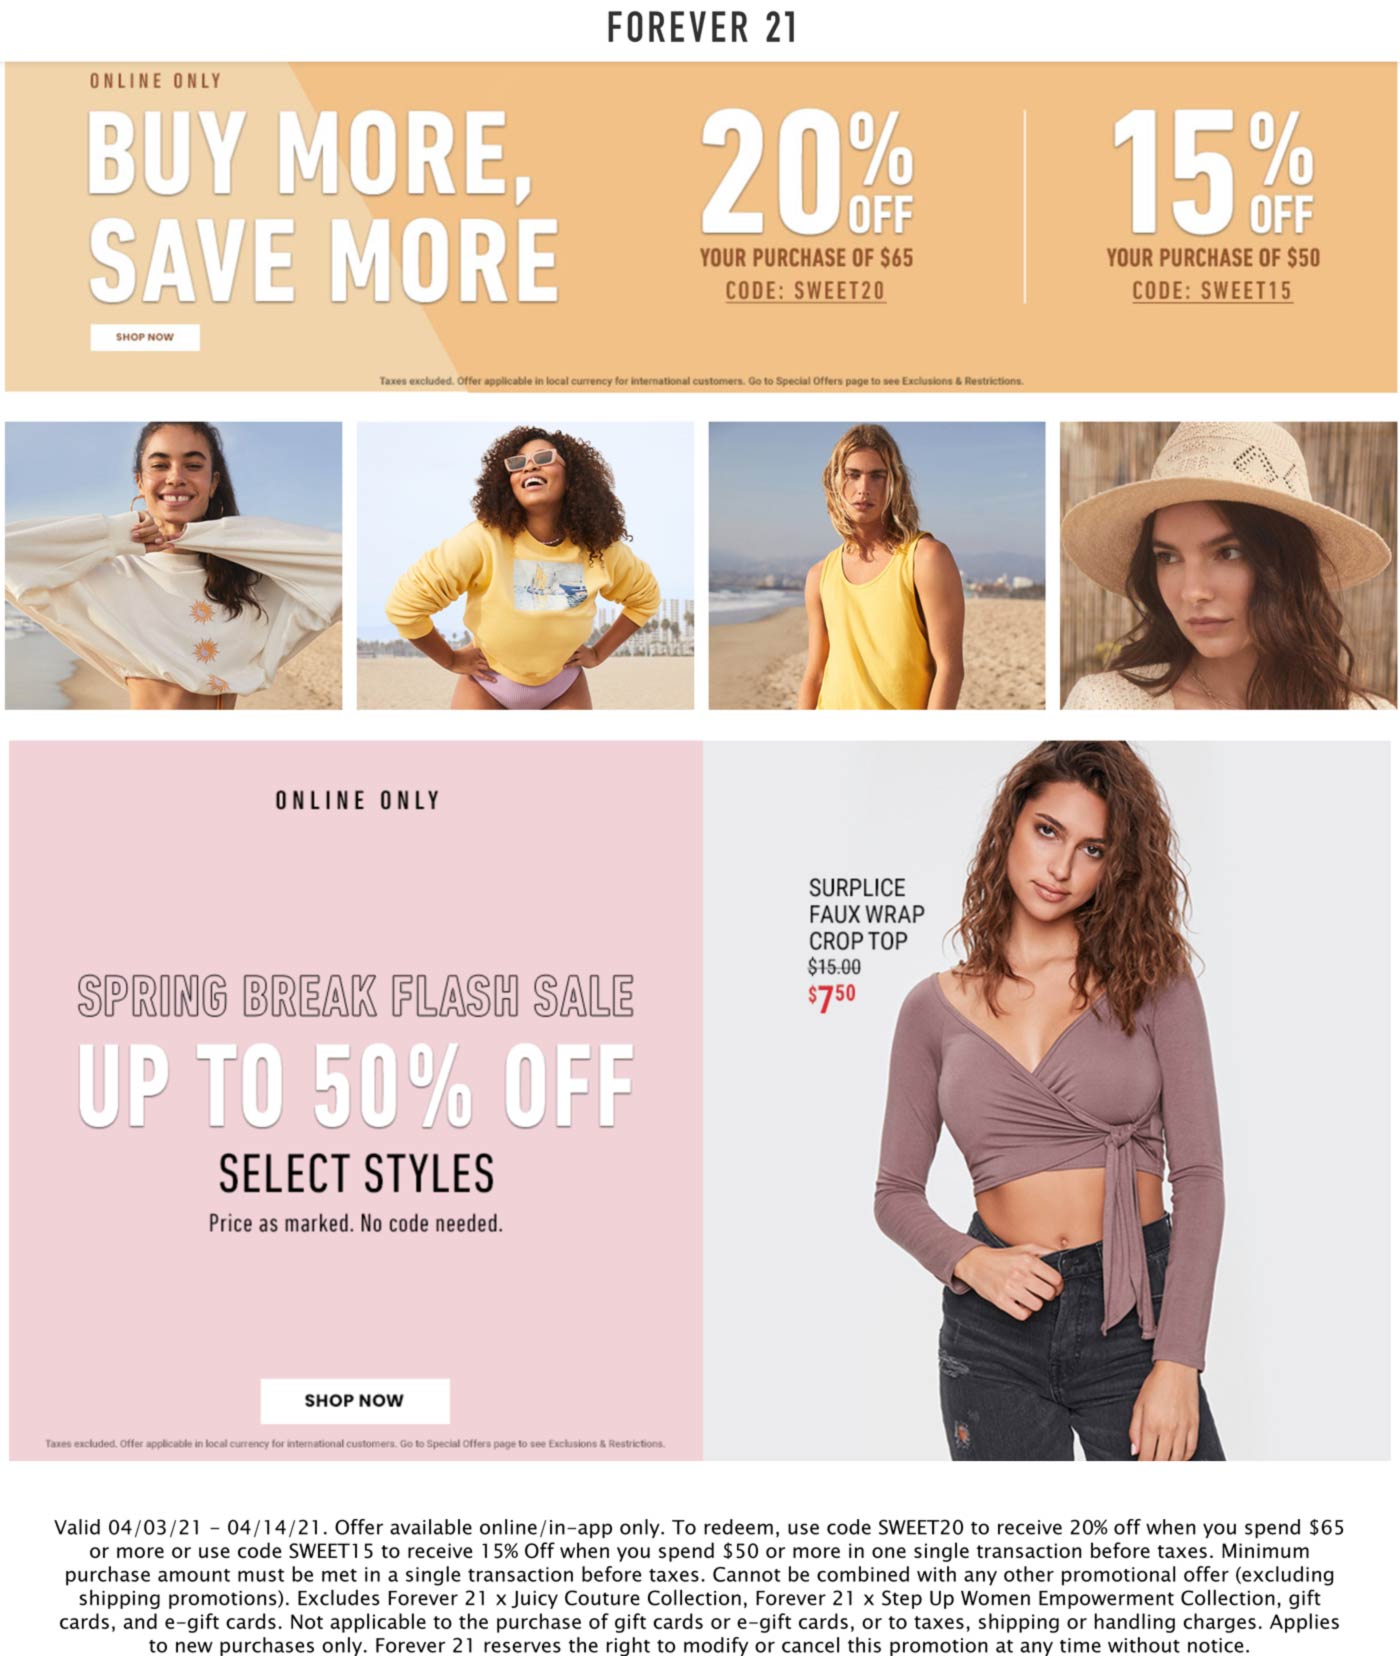 1520 off 50+ at Forever 21 via promo code SWEET15 and SWEET20 